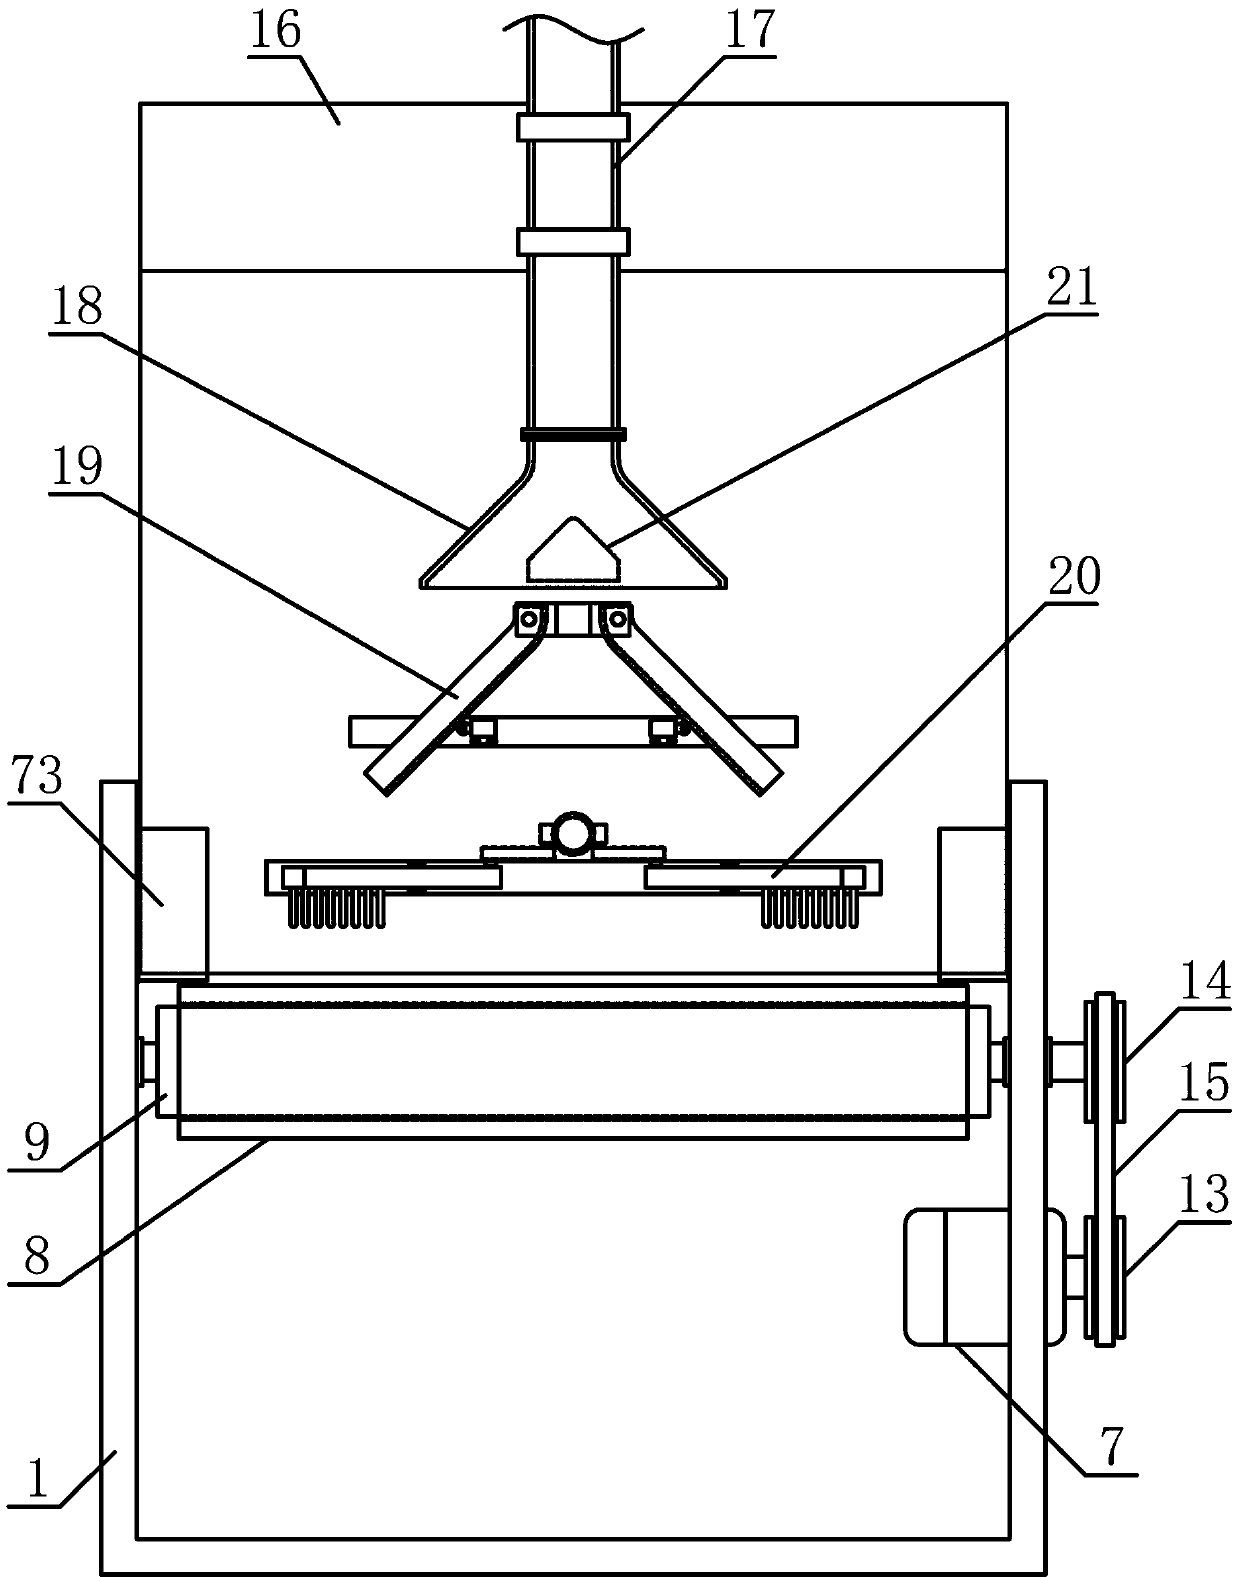 Wool spinning raw material guiding and flat spreading device used for wool top processing